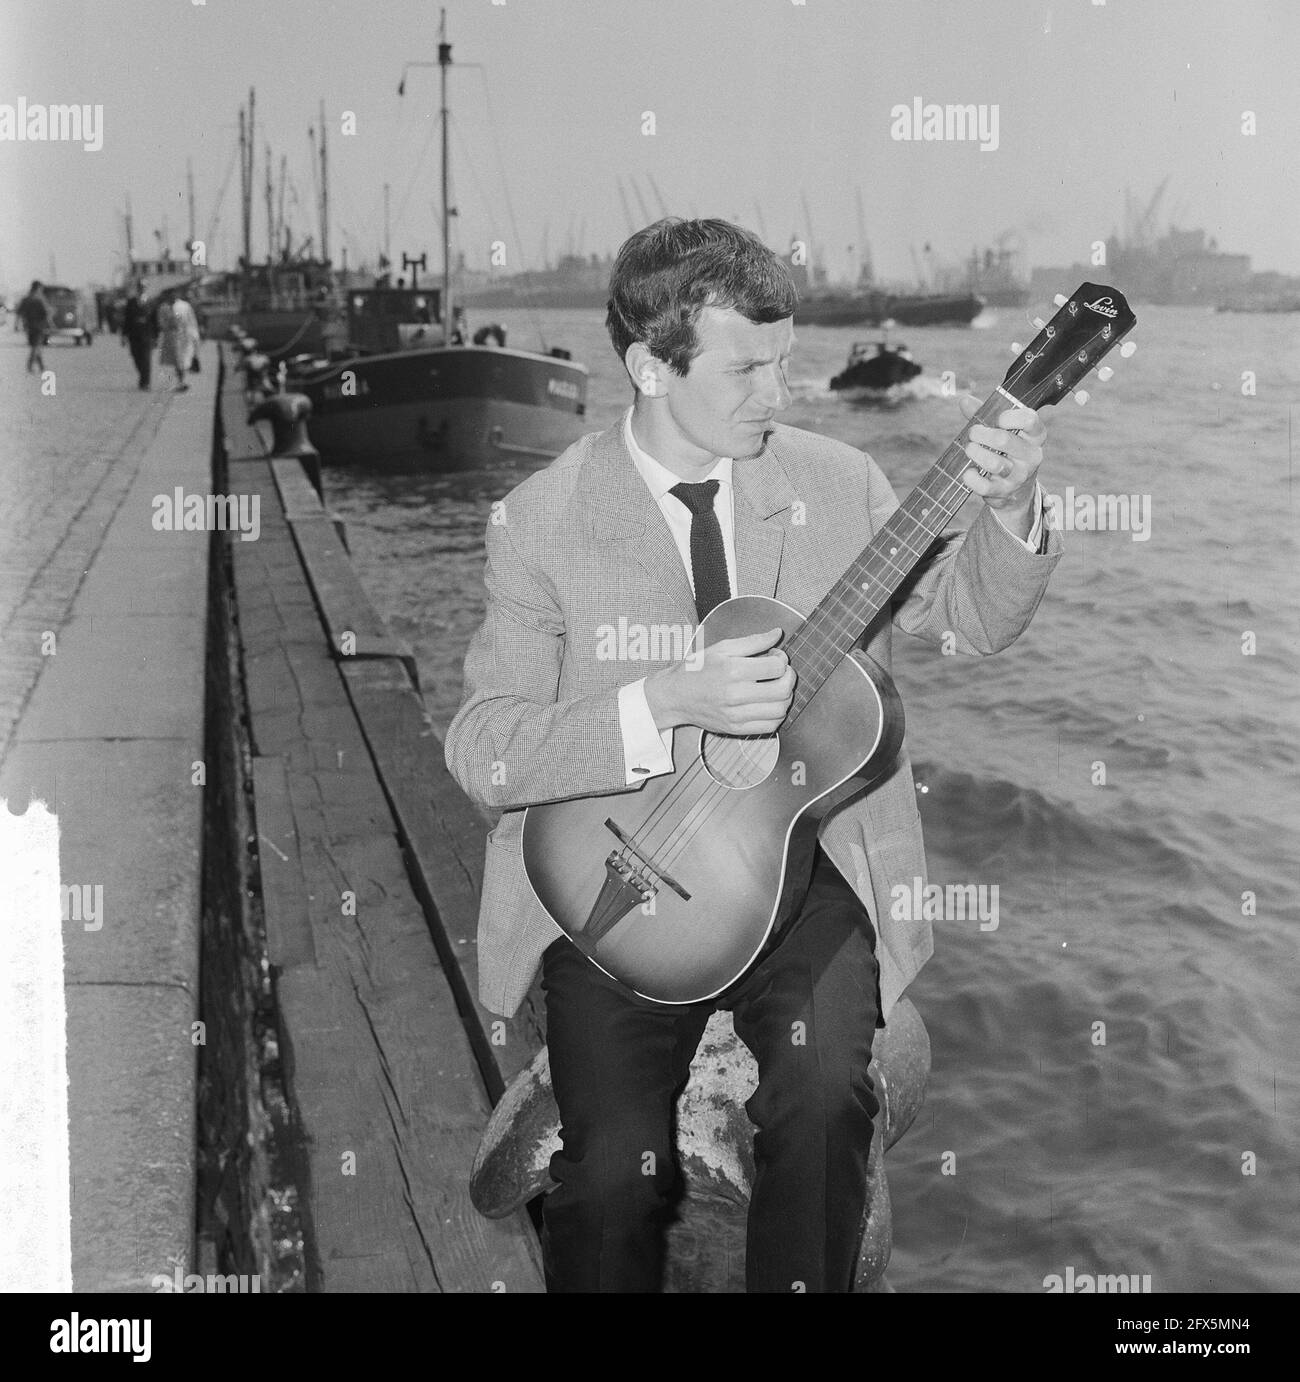 Gerard Cox in TV show of NCRV, singer Dutch chanson here at the port of Rotterdam, May 20, 1964, TV shows, guitars, ports, singers, The Netherlands, 20th century press agency photo, news to remember, documentary, historic photography 1945-1990, visual stories, human history of the Twentieth Century, capturing moments in time Stock Photo